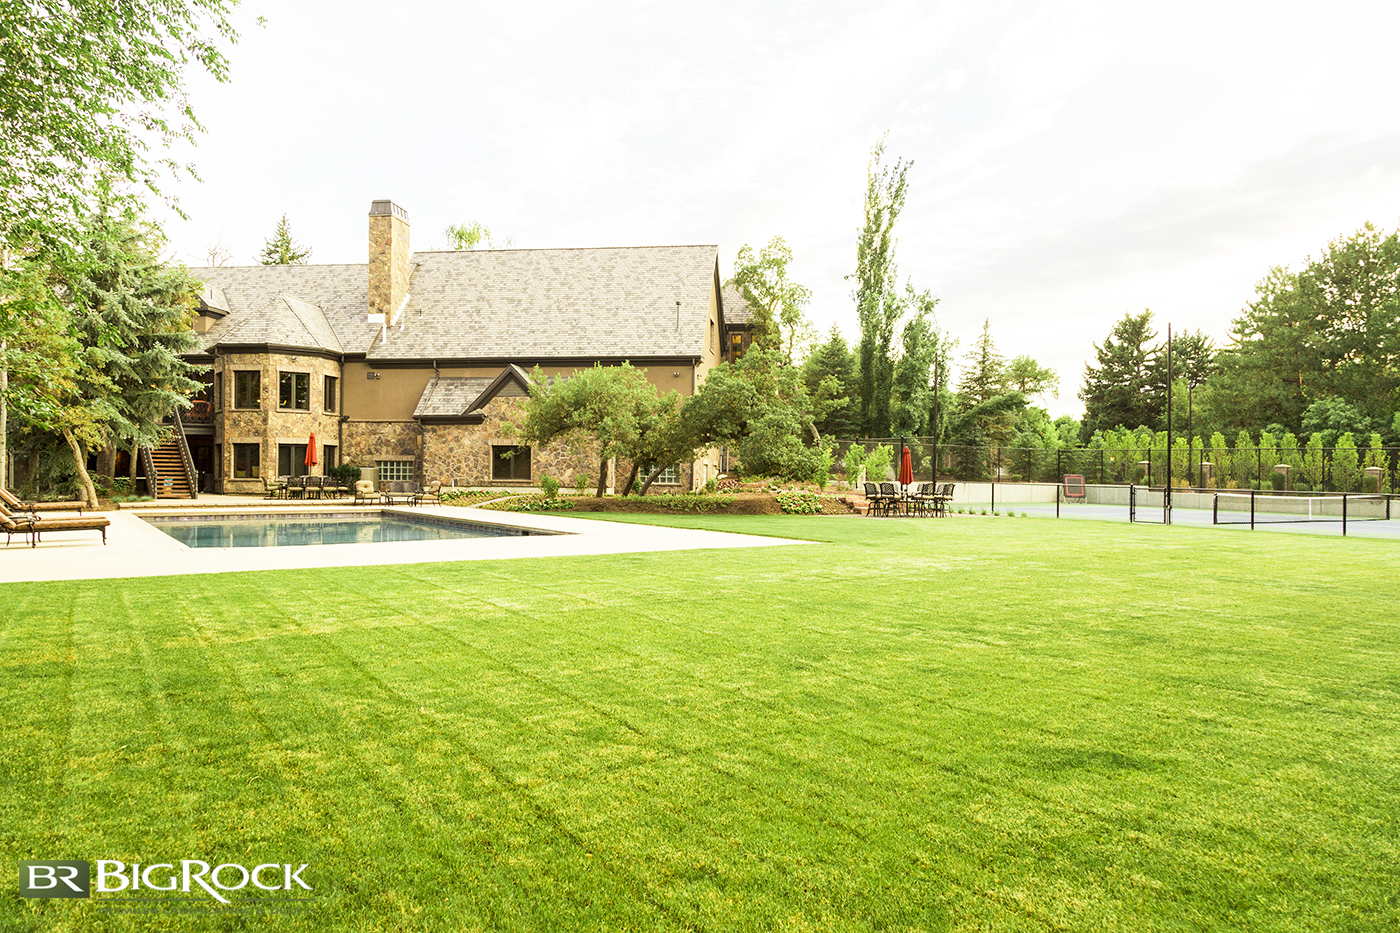 Large grass yards expand your play area and are a child's dream playground. Big Rock Landscaping can install, maintain and design your childhood dream landscape.